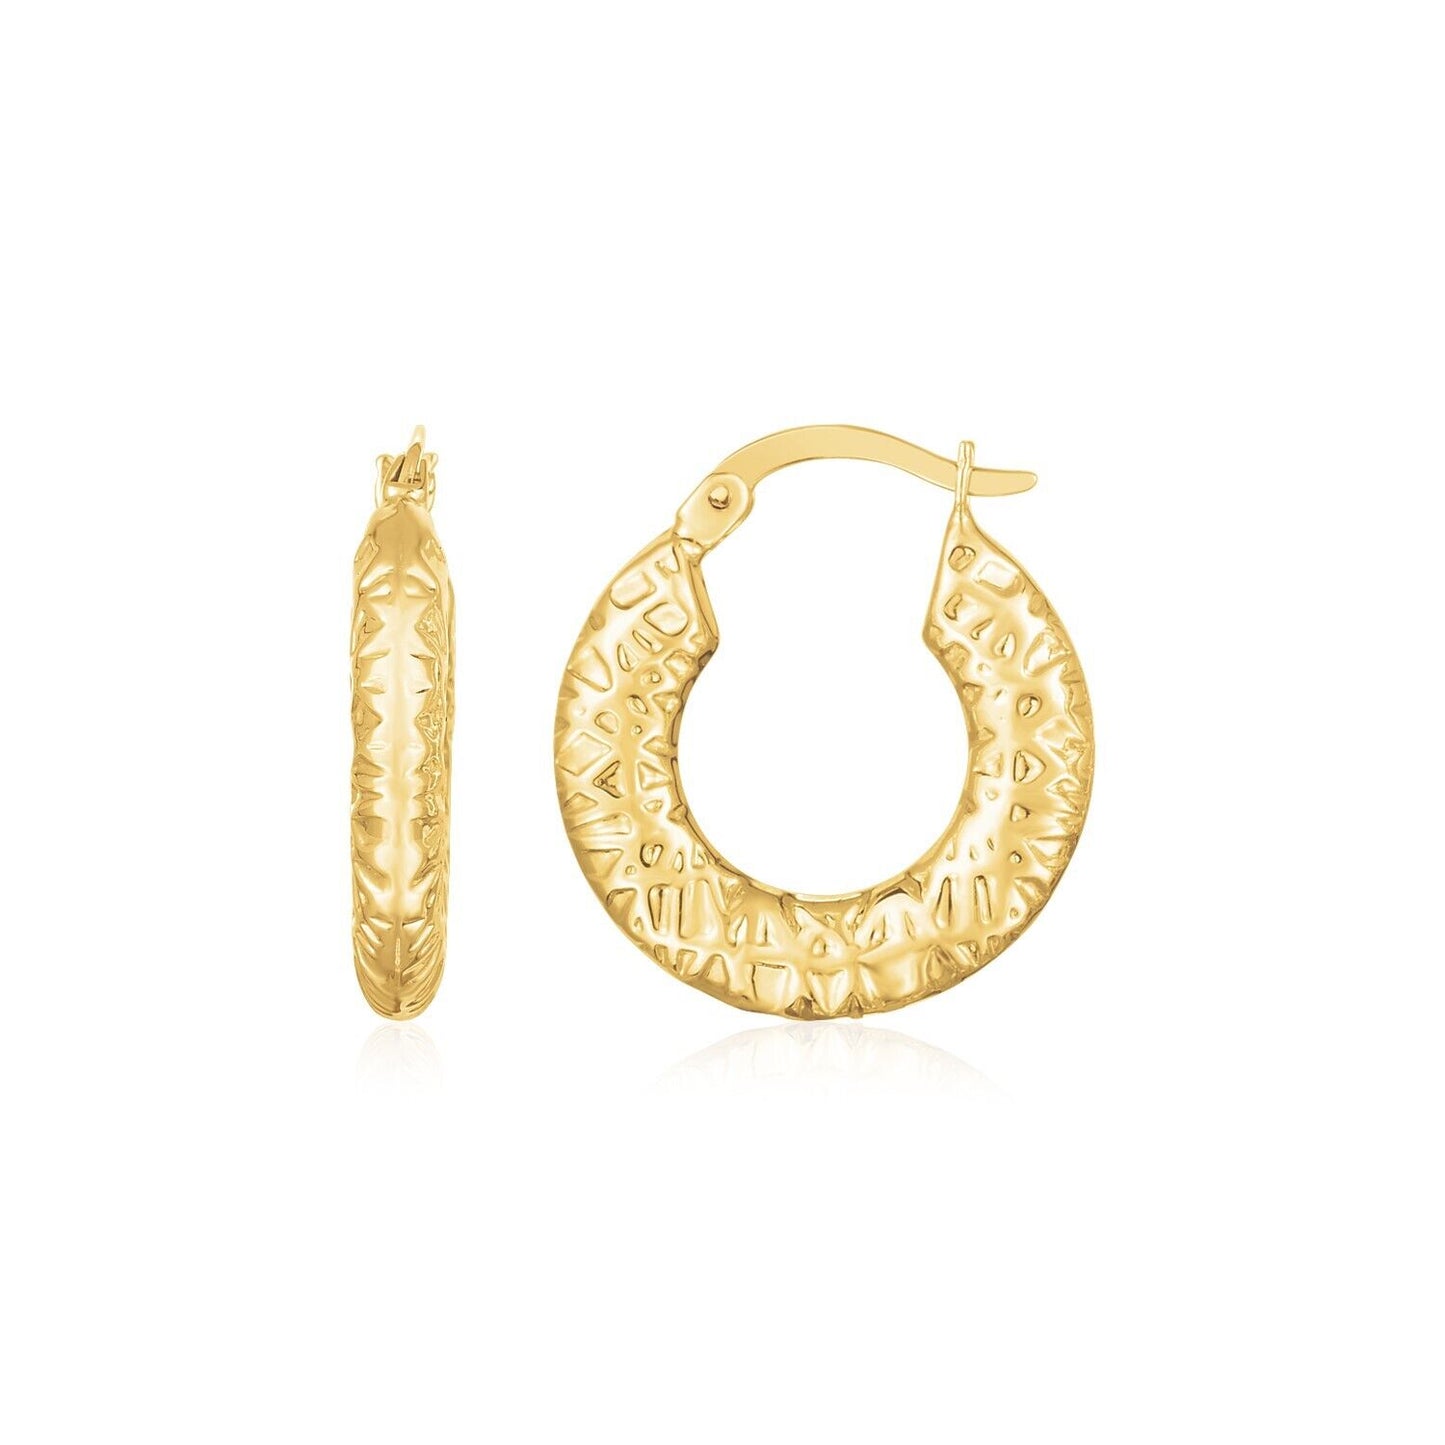 14K Yellow Gold Puffed Textured Hoops